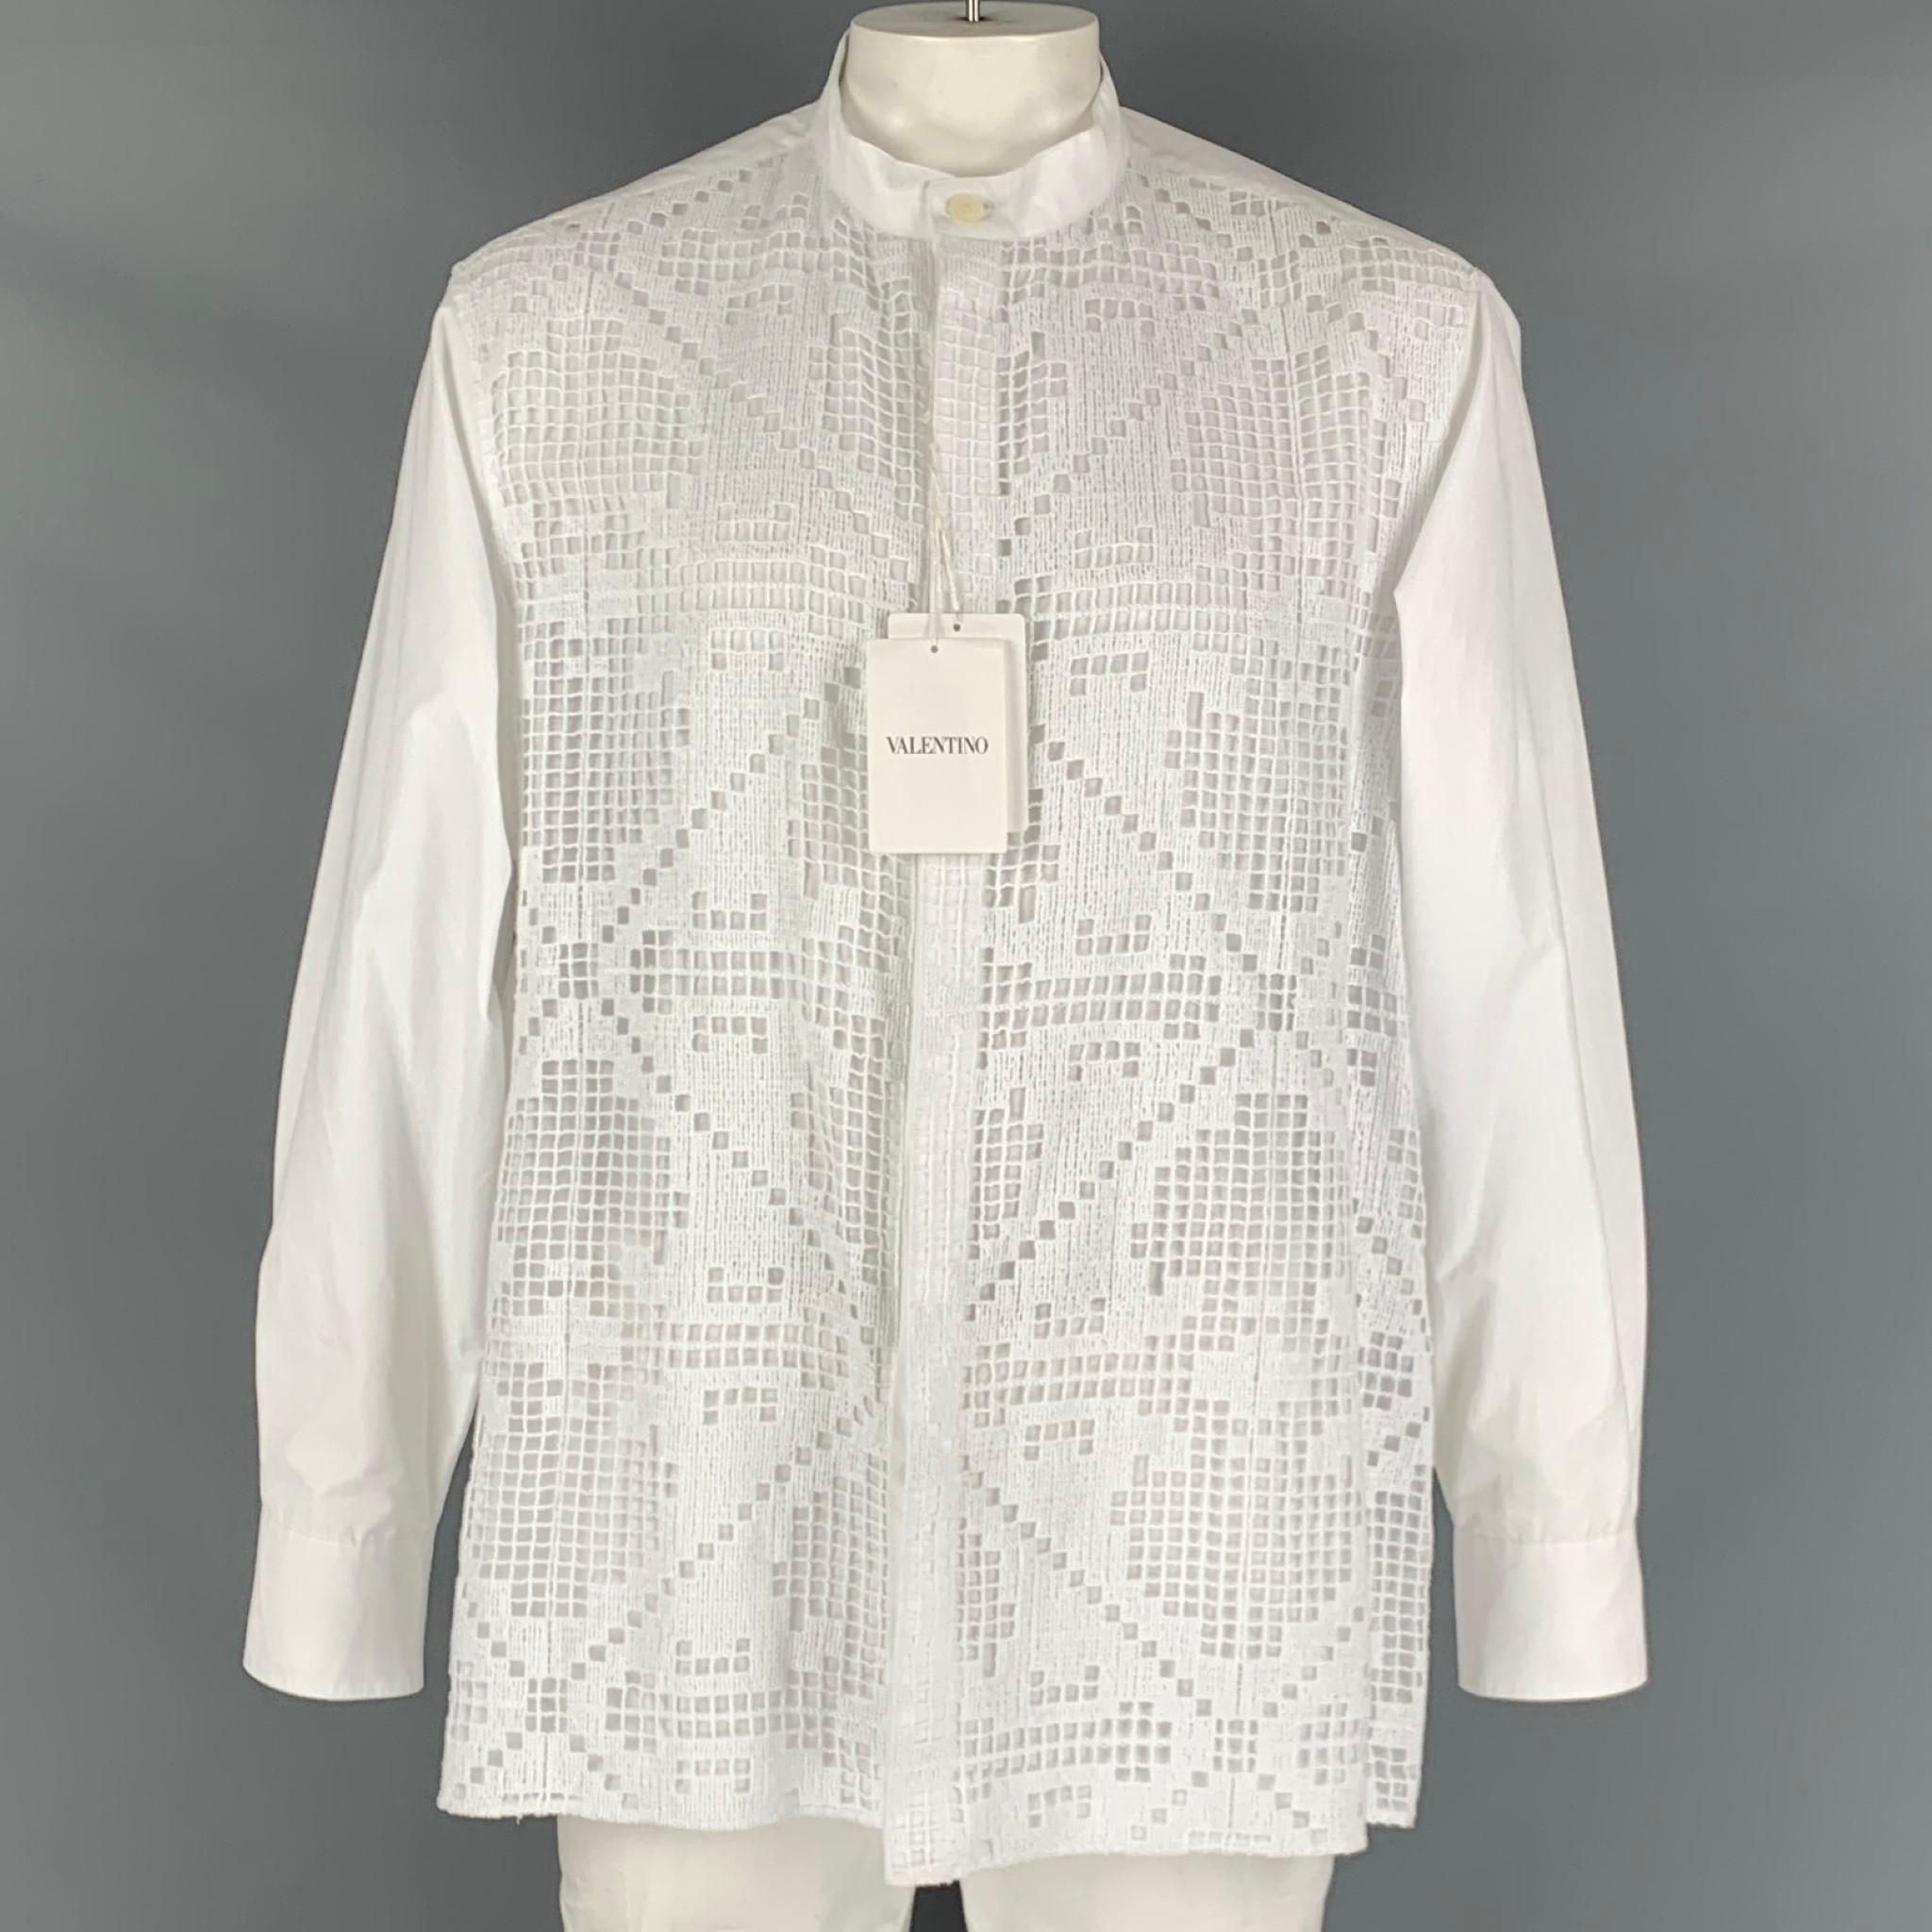 VALENTINO long sleeve shirt comes in a white cotton material, with a white guipure front panel featuring a collarless style, hidden placket, and buttons up closure. Made in Italy.

New With Tags
Marked: 44- 17 1/5

Measurements:

Shoulder: 19.5